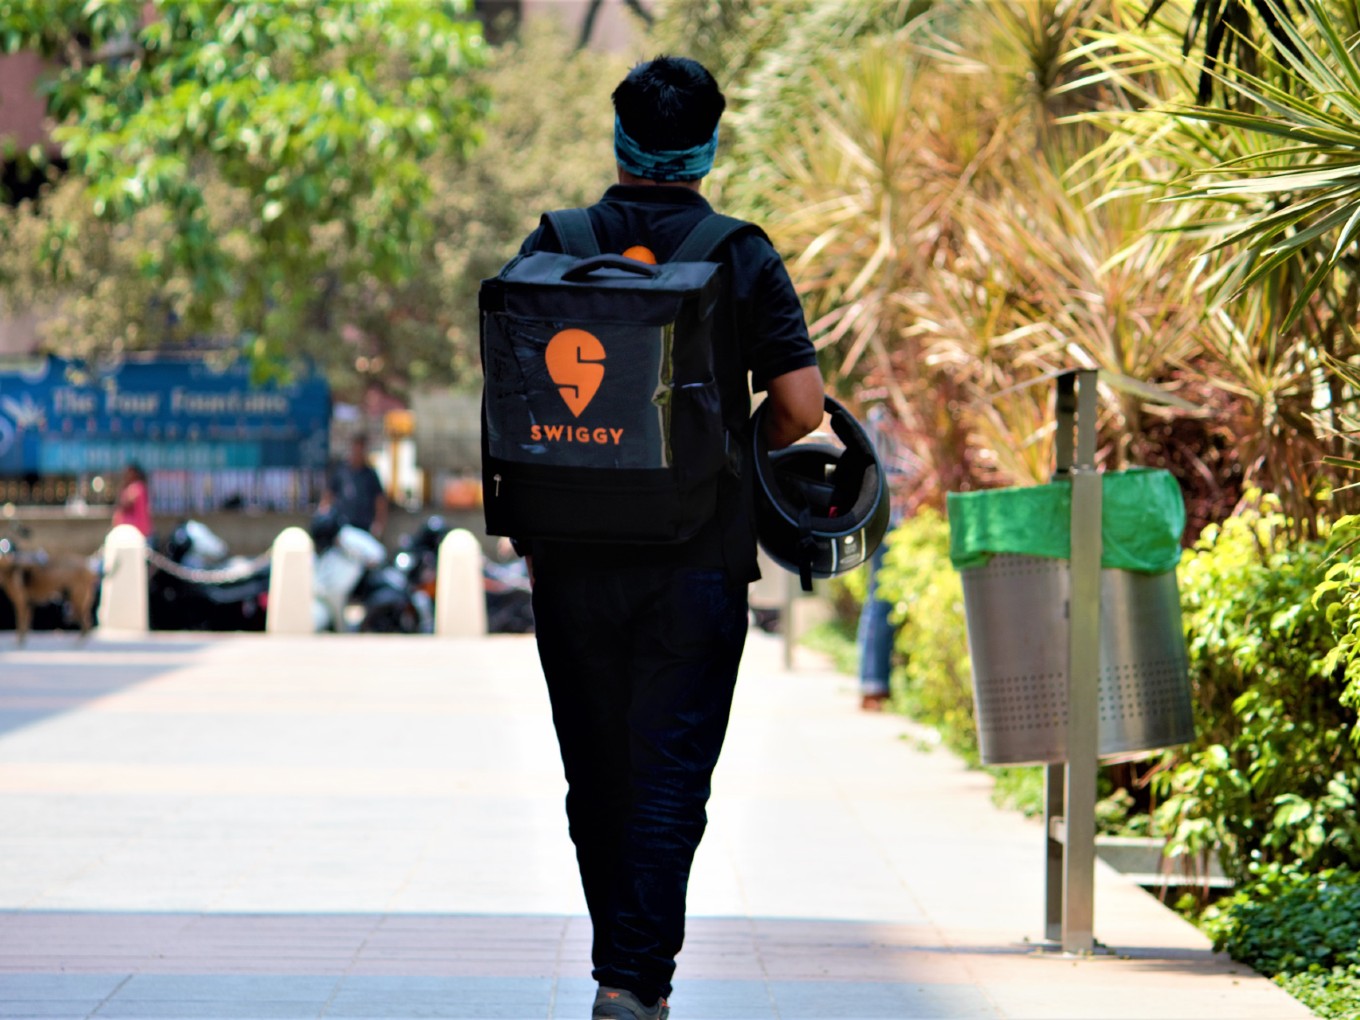 swiggy-to-cut-400-jobs-ahead-of-planned-ipo-financial-improvements-in-focus